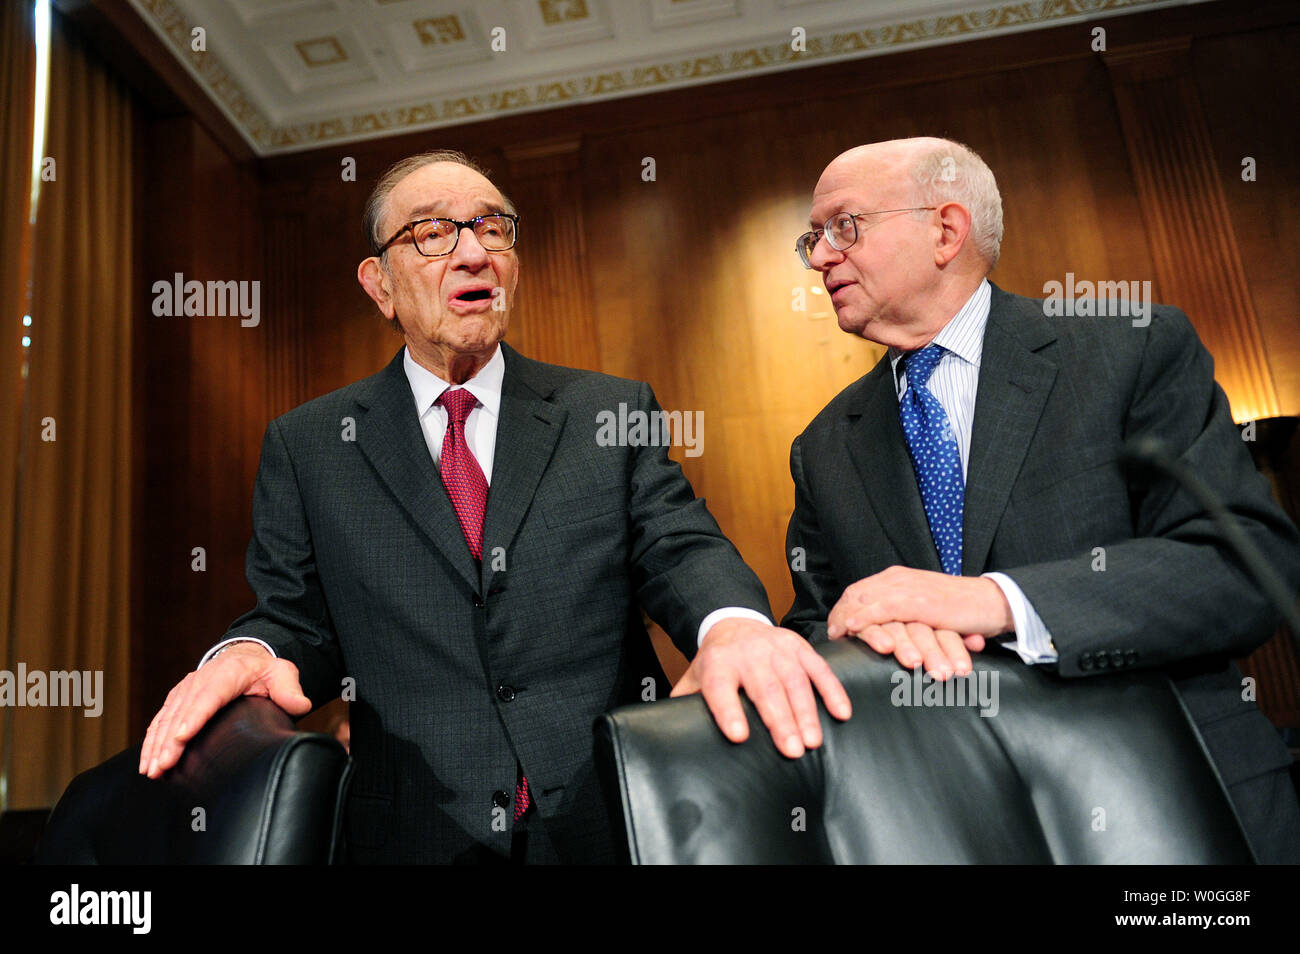 Former Federal Reserve Board Chairman Alan Greenspan (L) talks to Martin Feldstein, professor of economics at Harvard University, prior to a Senate Finance Committee hearing on tax reform and U.S. fiscal policy Washington on September 13, 2011.  UPI/Kevin Dietsch Stock Photo